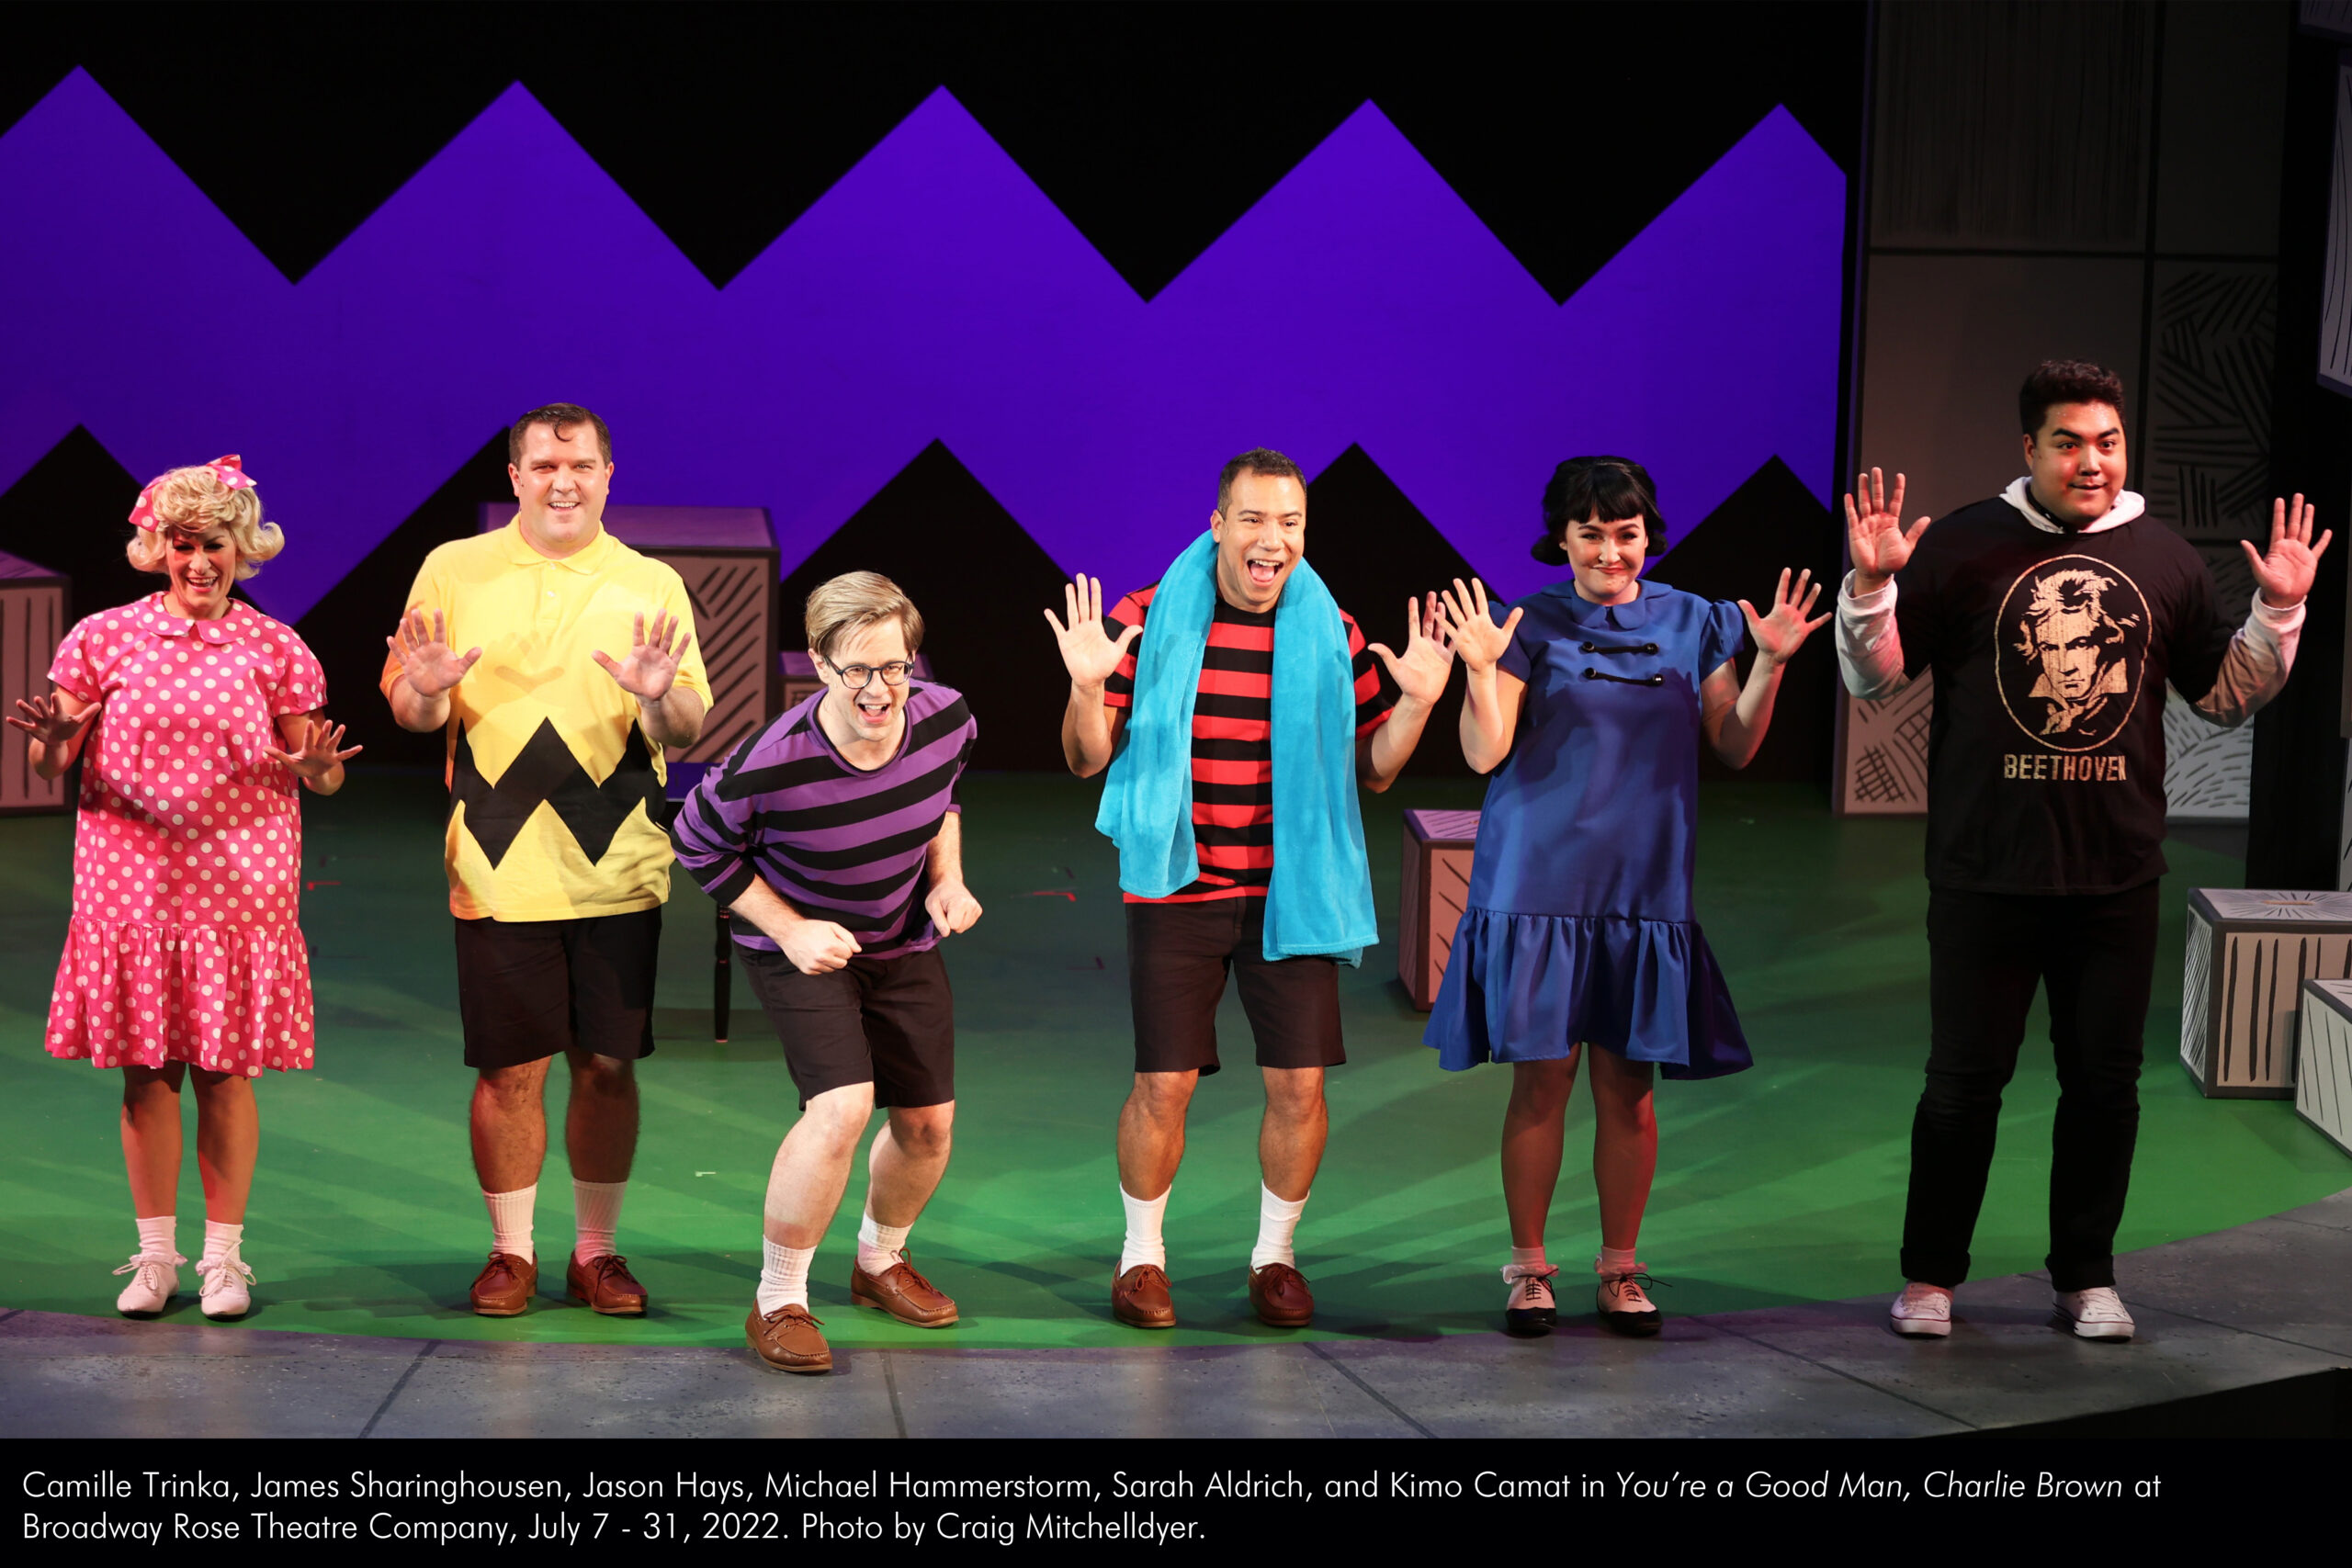 Camille Trinka, James Sharinghousen, Jason Hays, Michael Hammerstorm, Sarah Aldrich, and Kimo Camat in "You're a Good Man, Charlie Brown" at Broadway Rose Theatre Company, July 7 - 31, 2022. Photo by Craig Mitchelldyer.